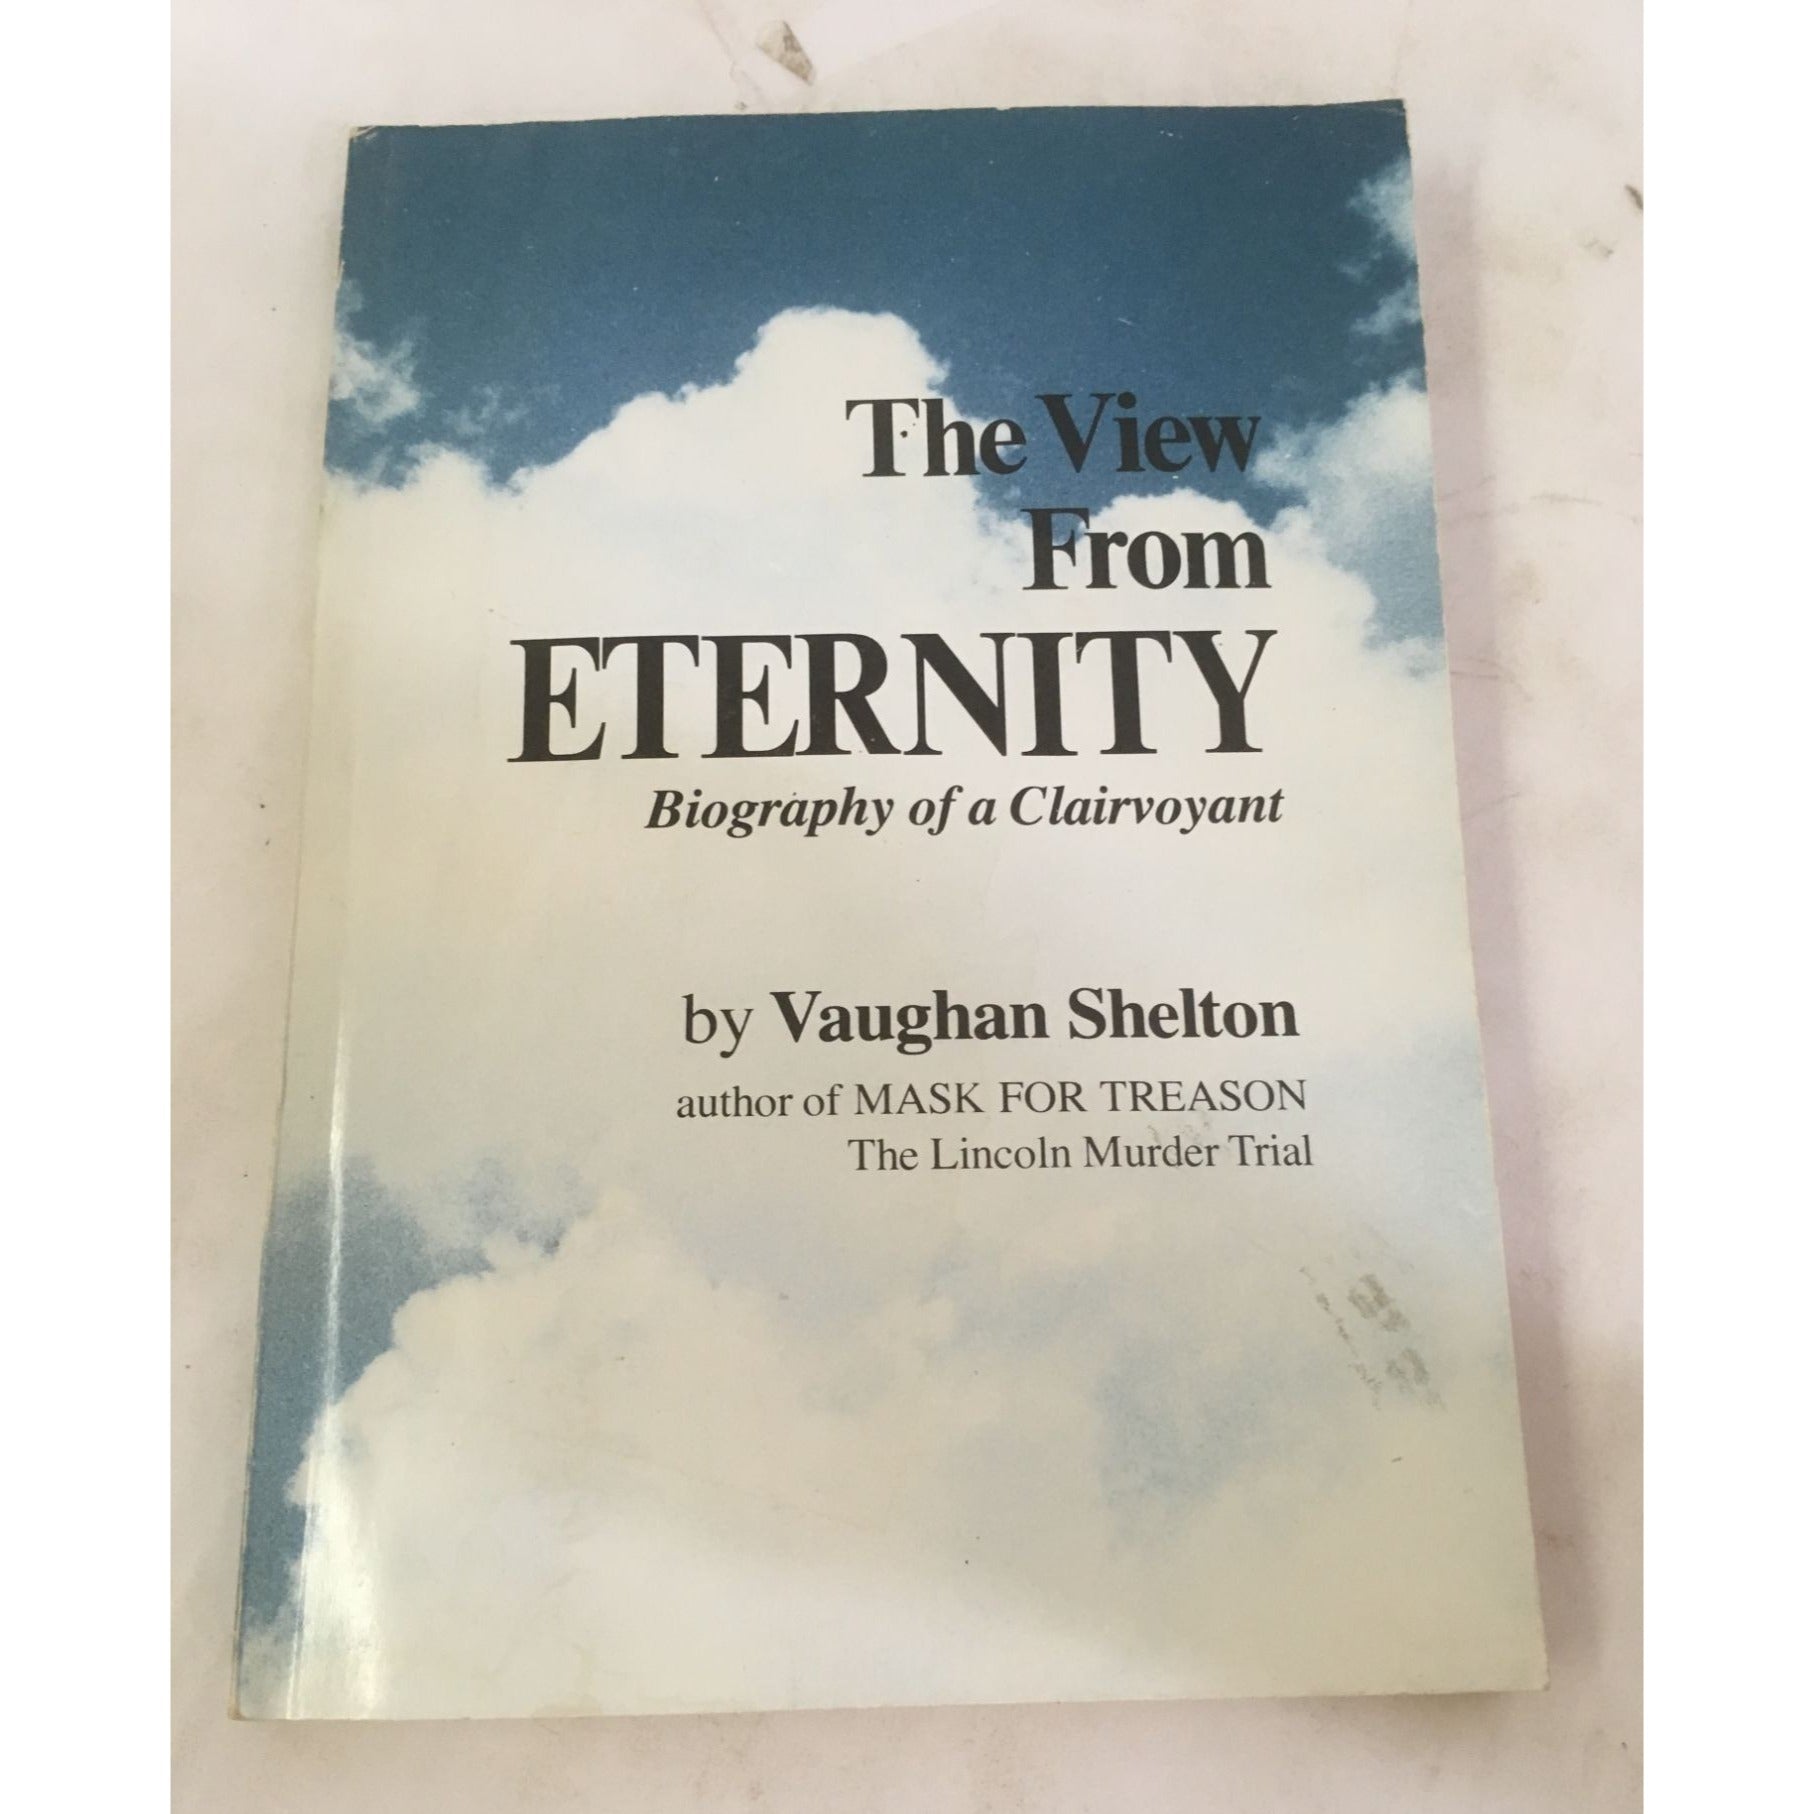 THE VIEW FROM ETERNITY Biography Of A Clairvoyant by Vaughan Shelton